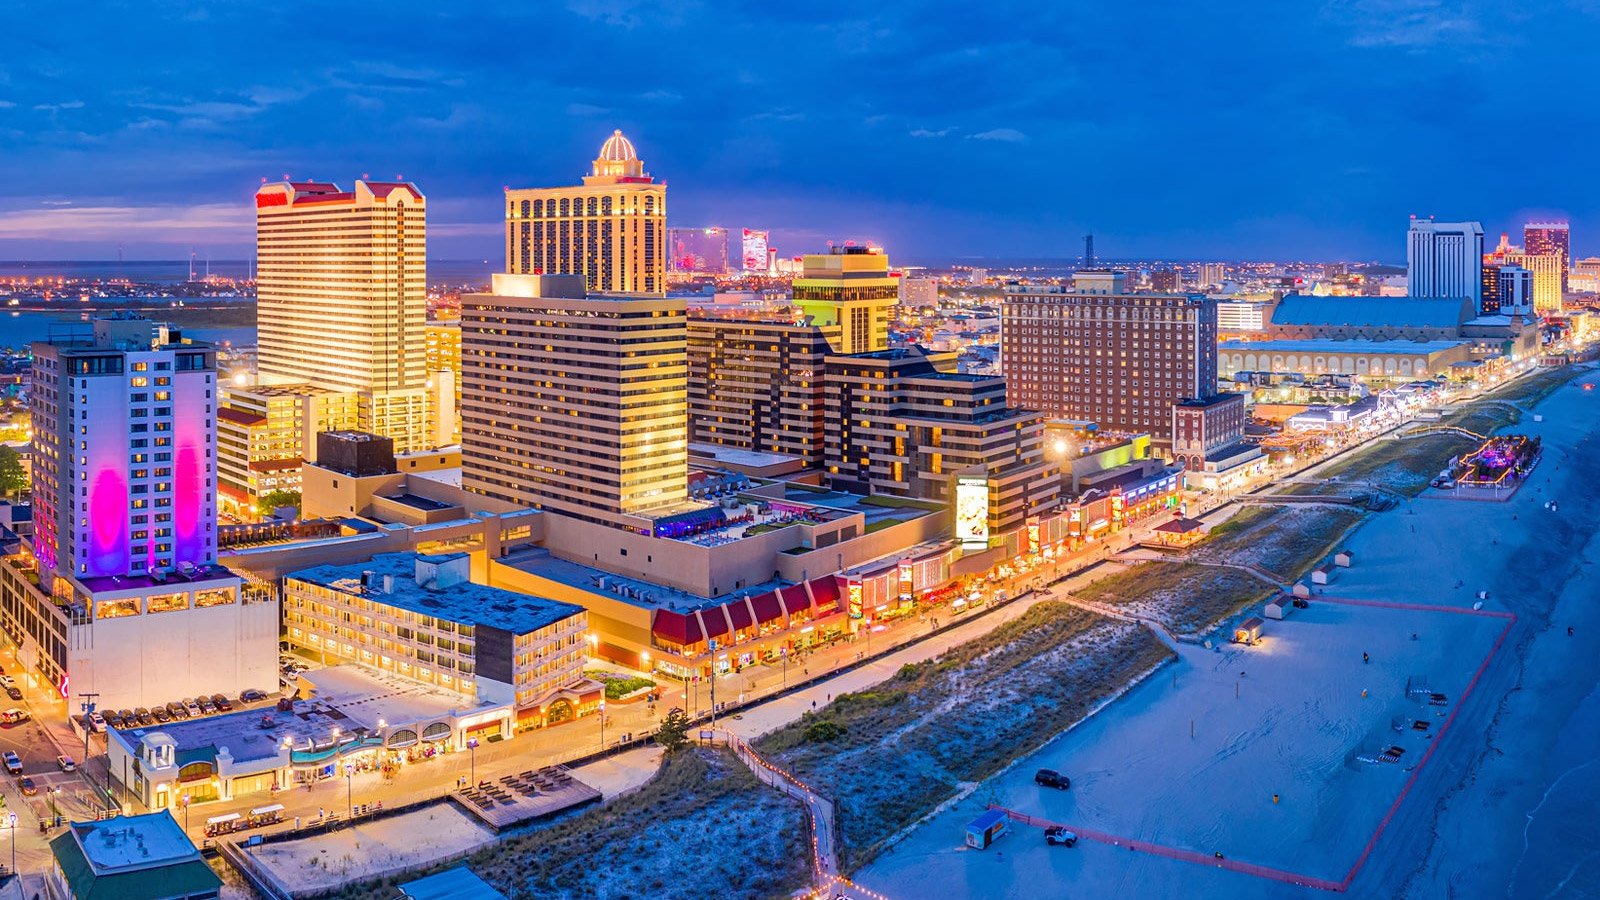 Atlantic City’s gambling industry braces for dual threat from New York casinos, Meadowlands project | Yogonet International